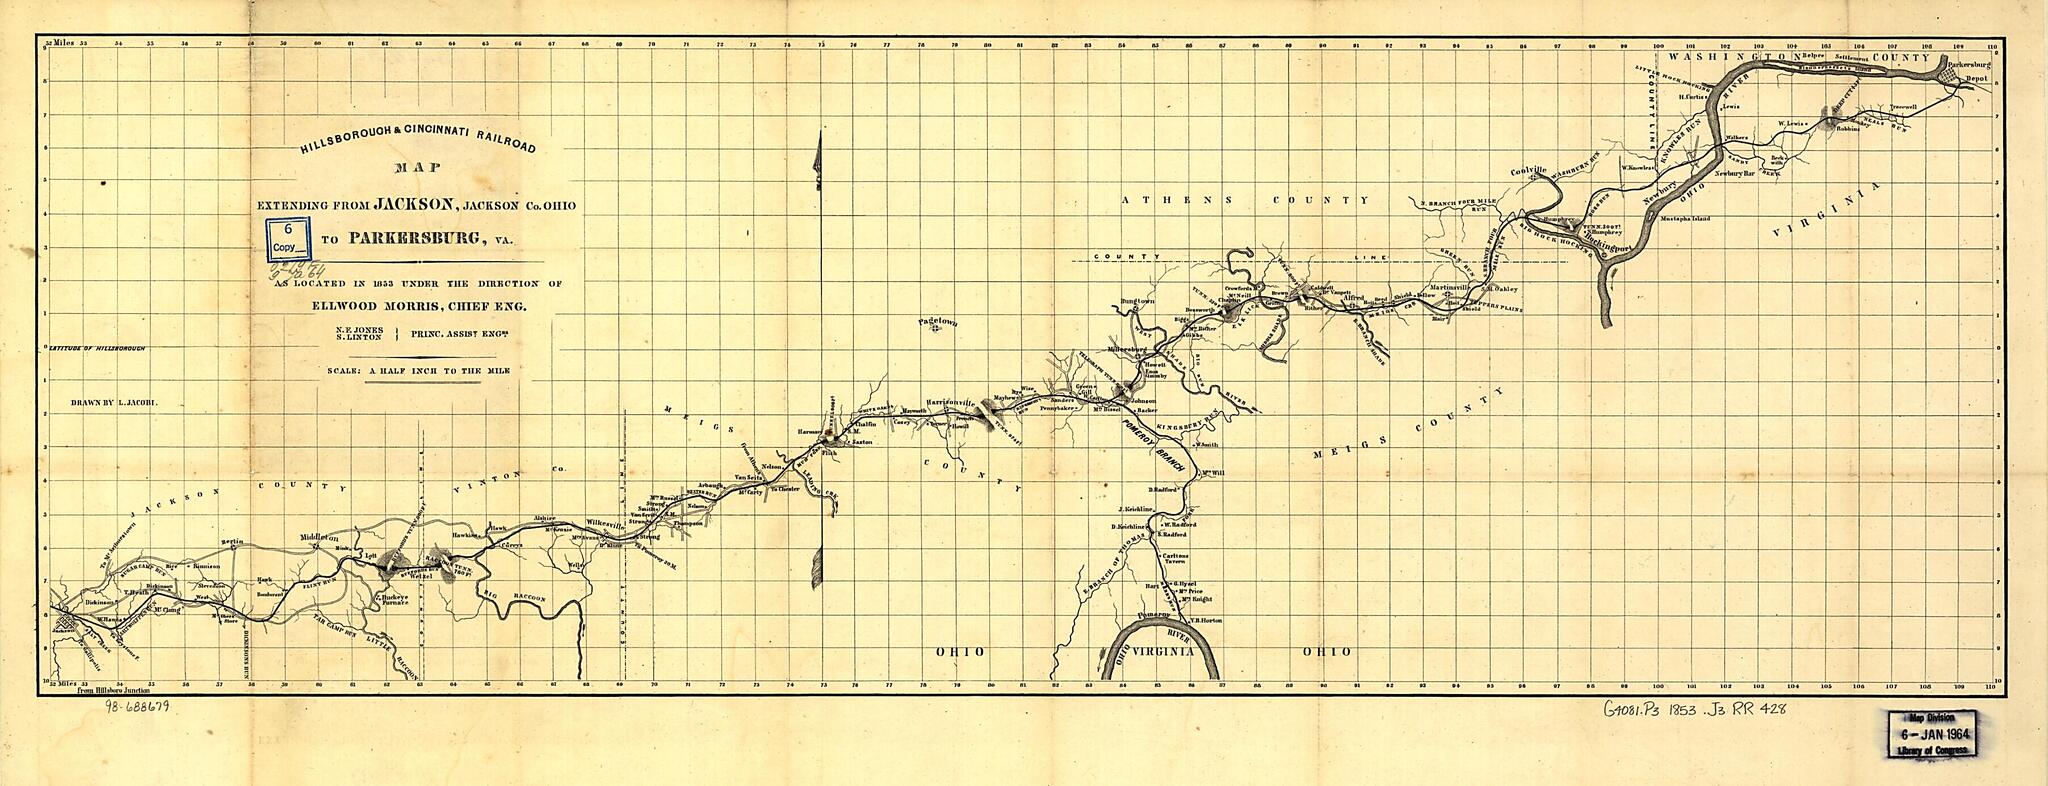 This old map of Hillsborough &amp; Cincinnati Railroad Map Extending from Jackson, Jackson County Ohio to Parkersburg, Va., As Located In from 1853 Under the Direction of Ellwood Morris, Chief Eng. N. E. Jones, S. Linton, Princ. Assist. Engrs was created by 